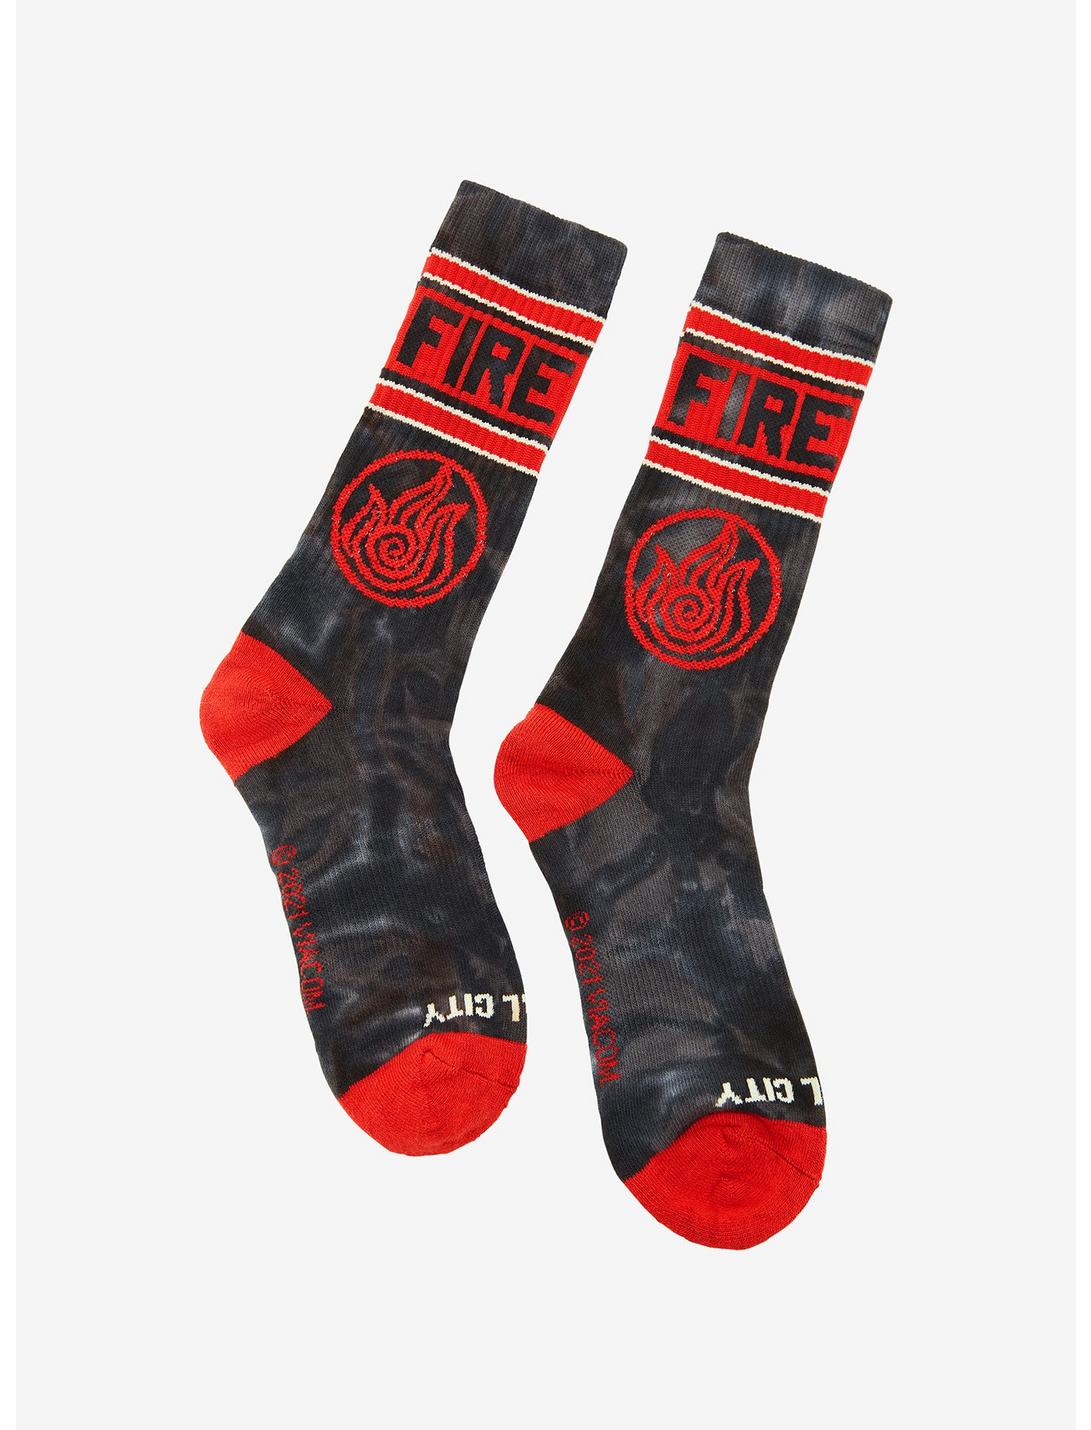 Avatar: The Last Airbender Firebender Crew Socks - BoxLunch Exclusive, , hi-res